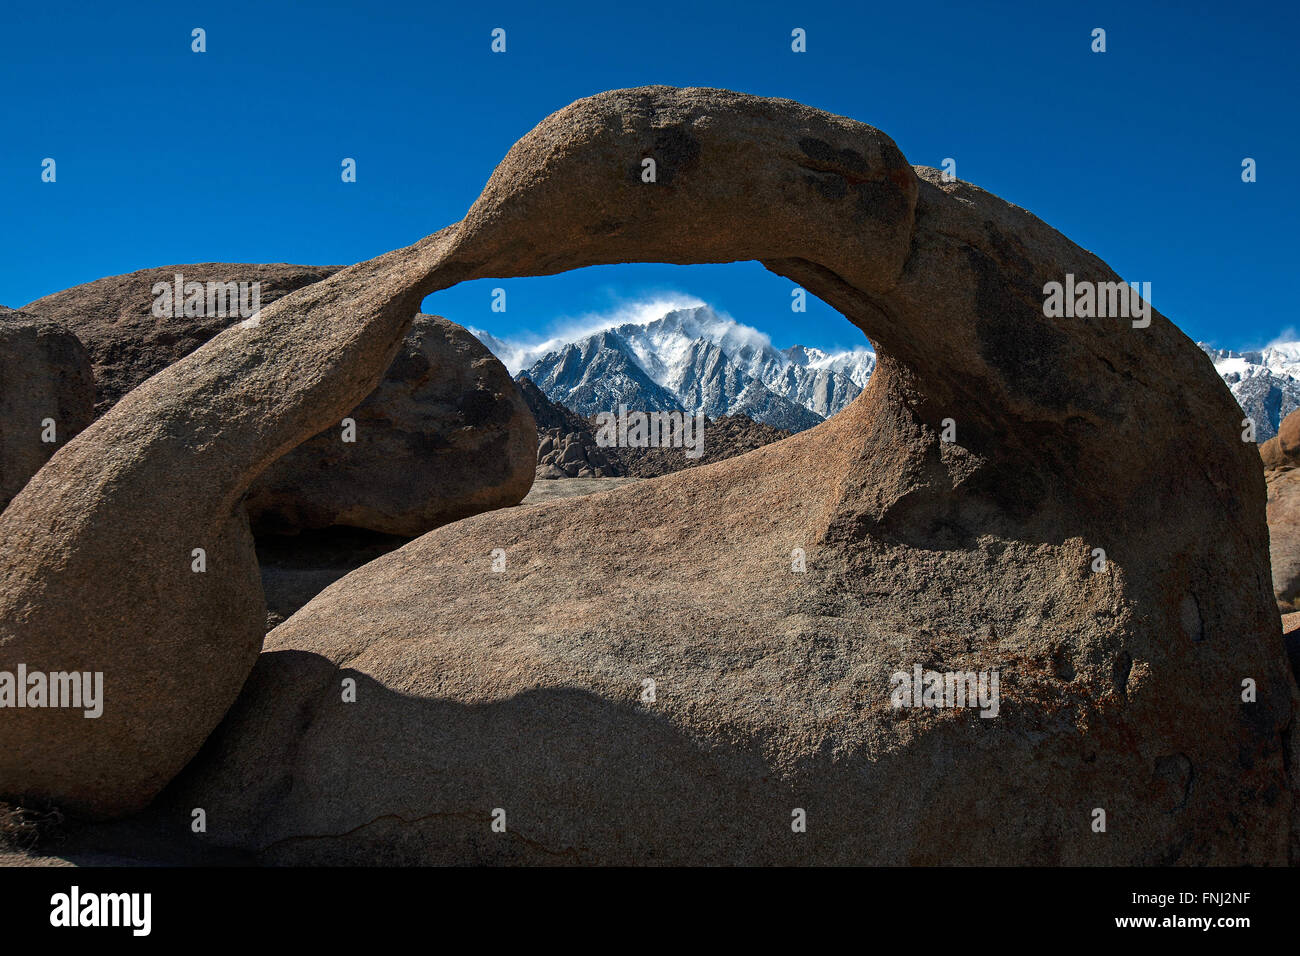 Snowcapped Mount Whitney viewed through Mobius Arch, Alabama Hills, California, United States of America Stock Photo